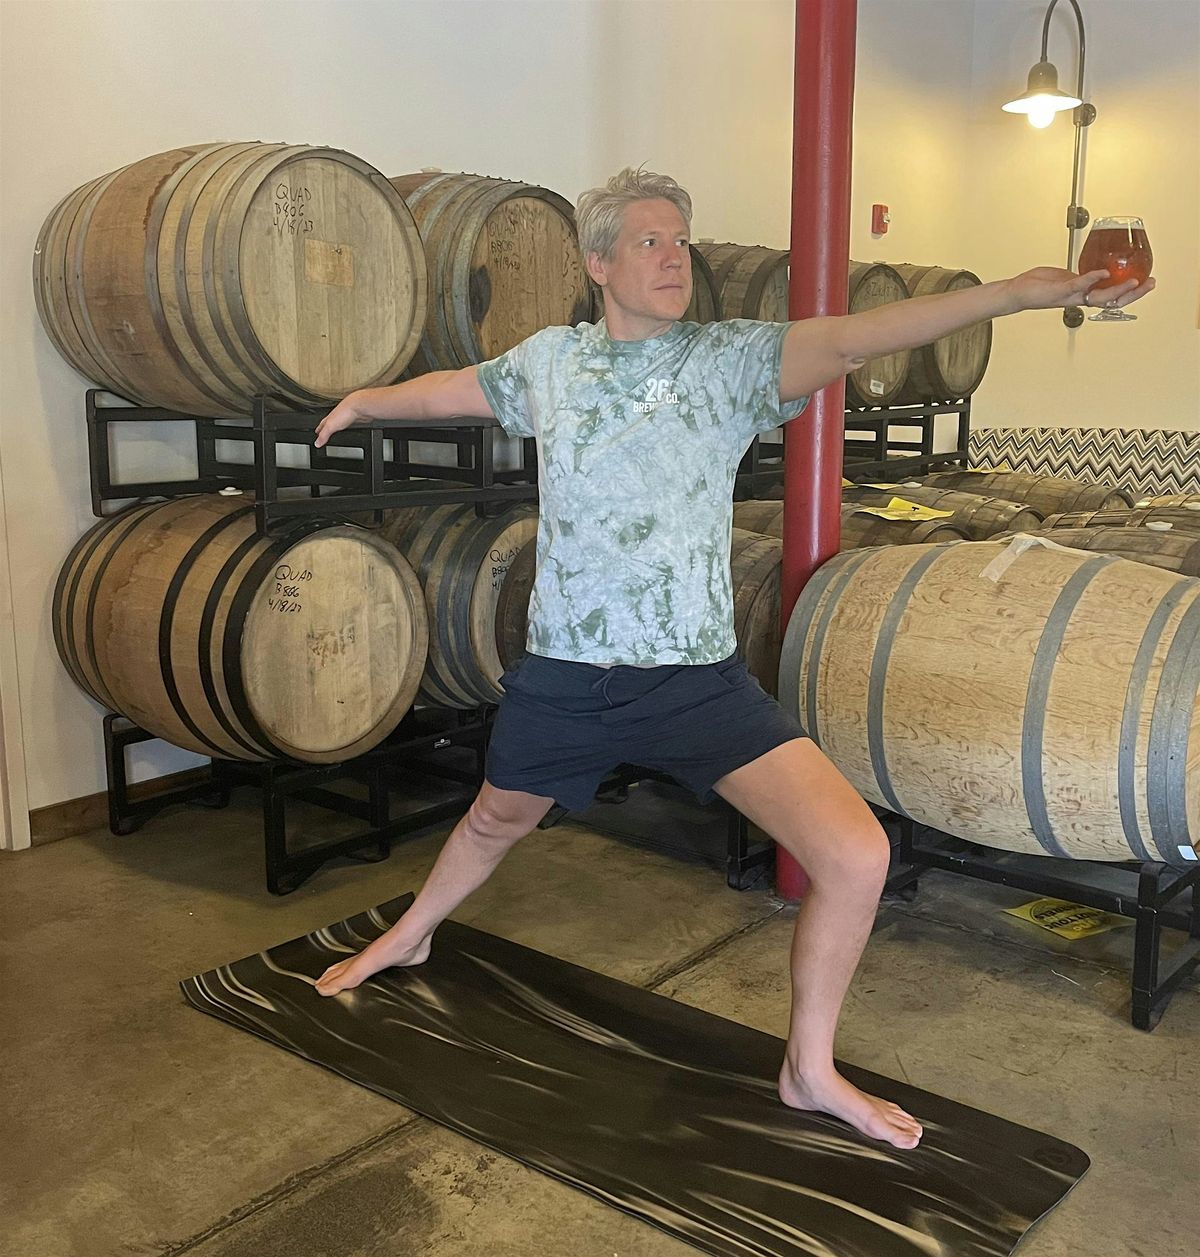 Yoga and Beer @ 26 Degree is back!